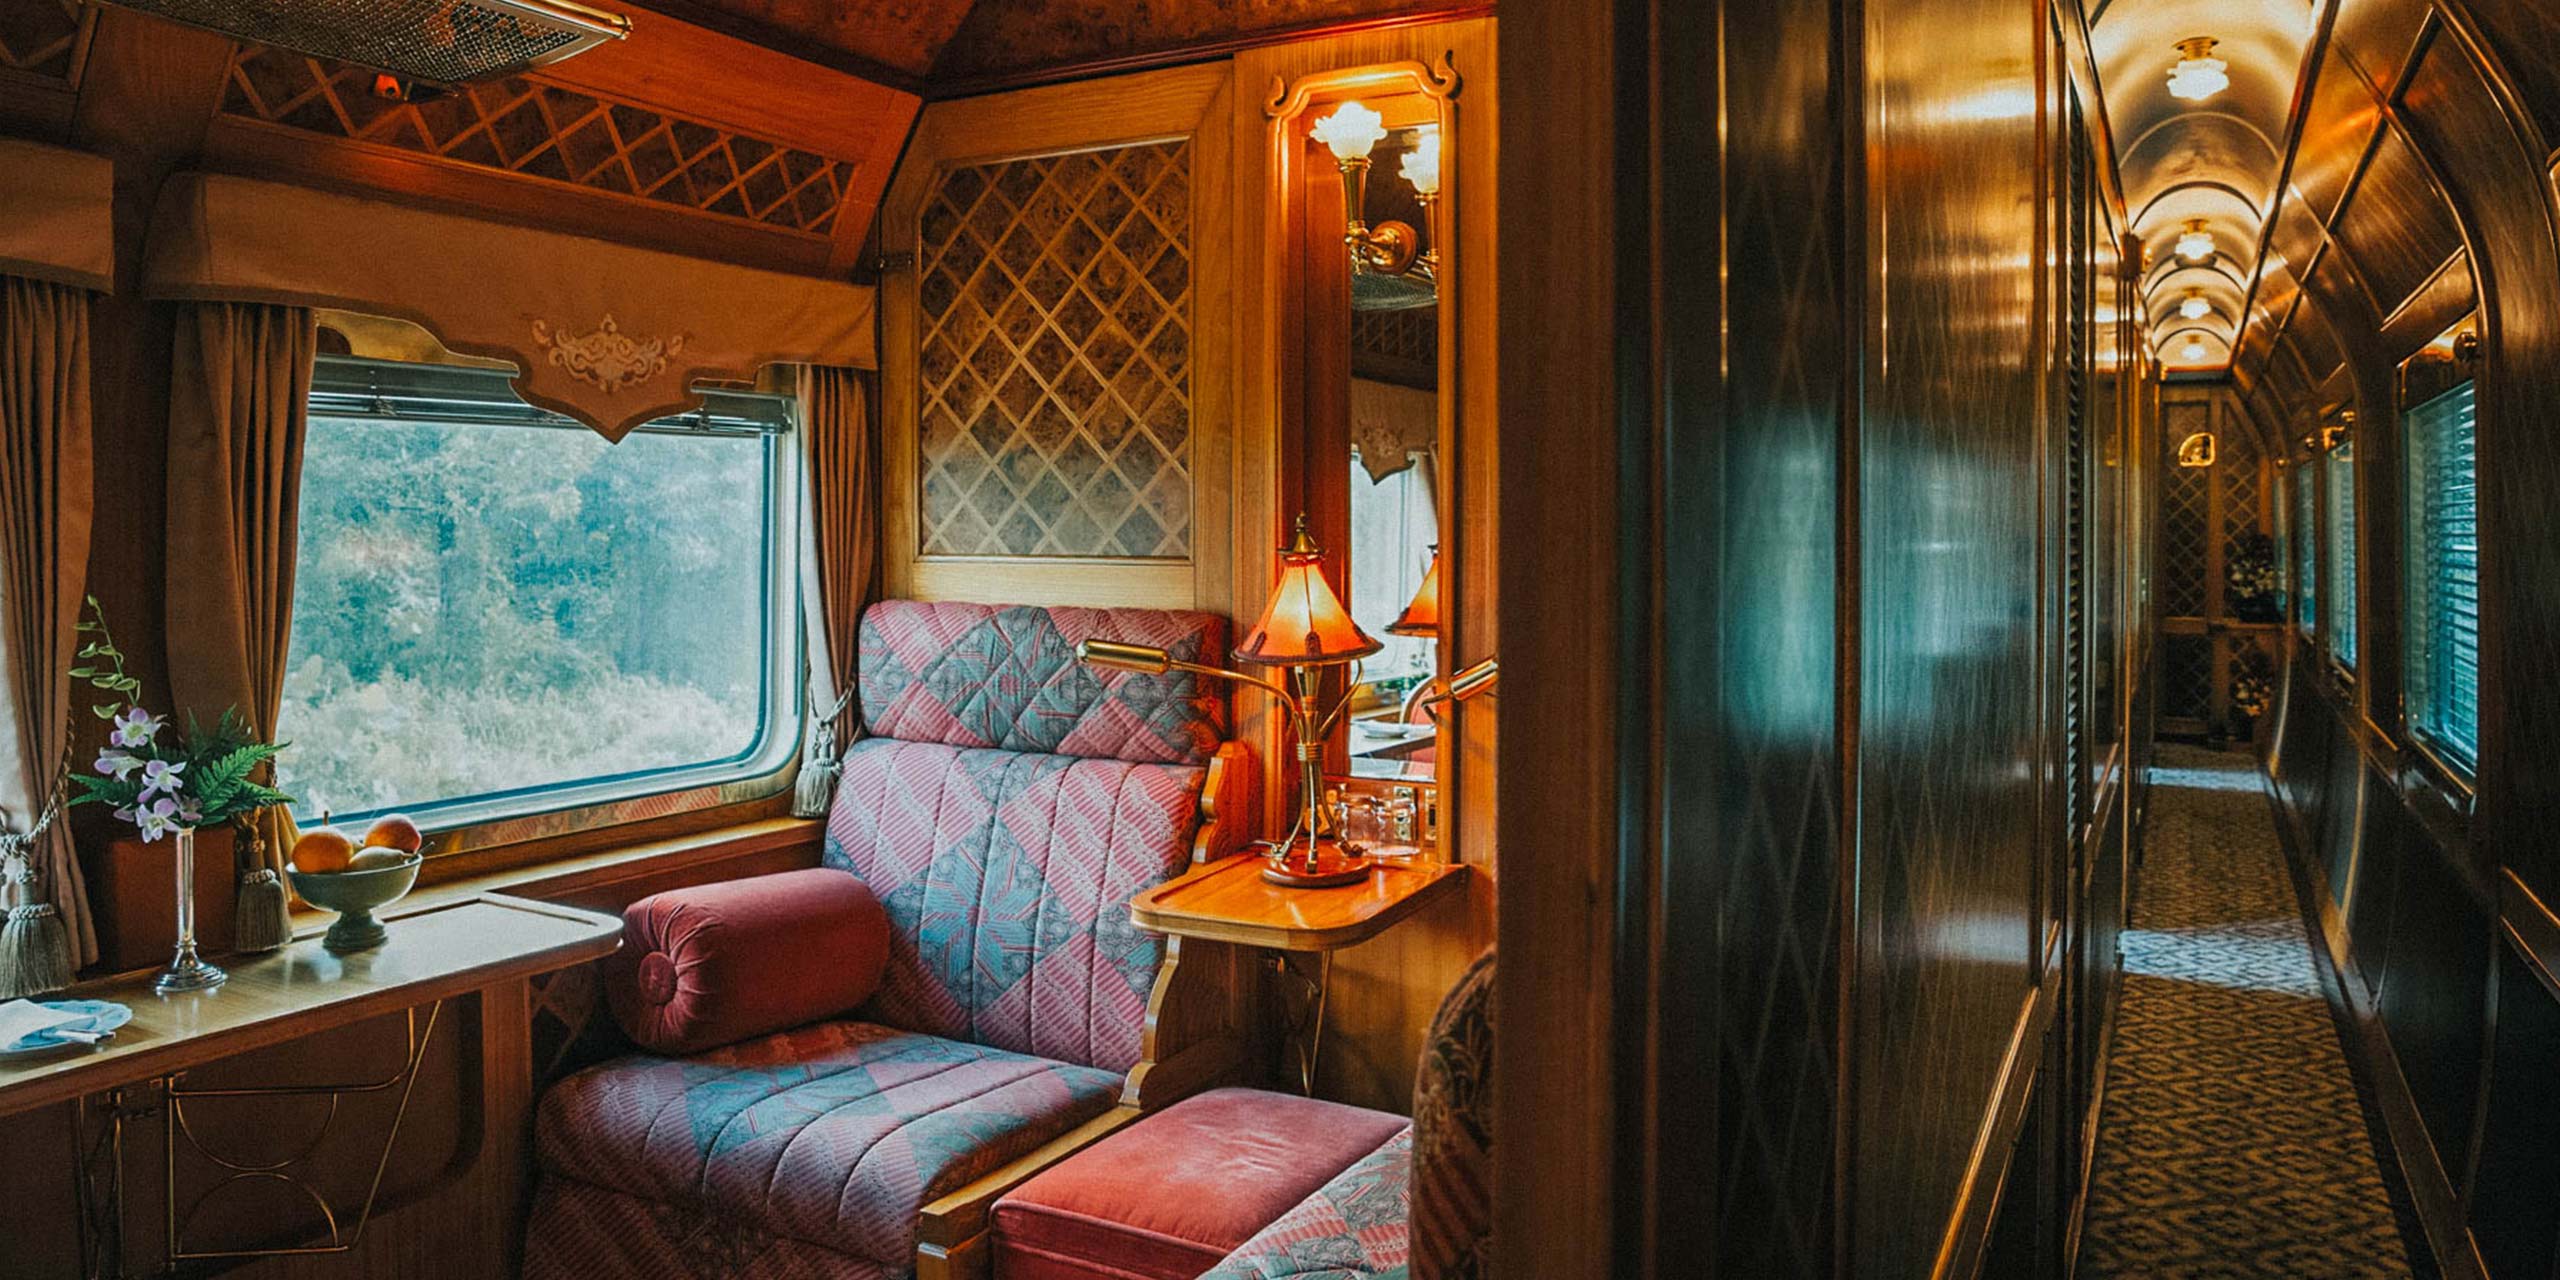 A First Look Inside the Glamorous New Orient Express Train Coming